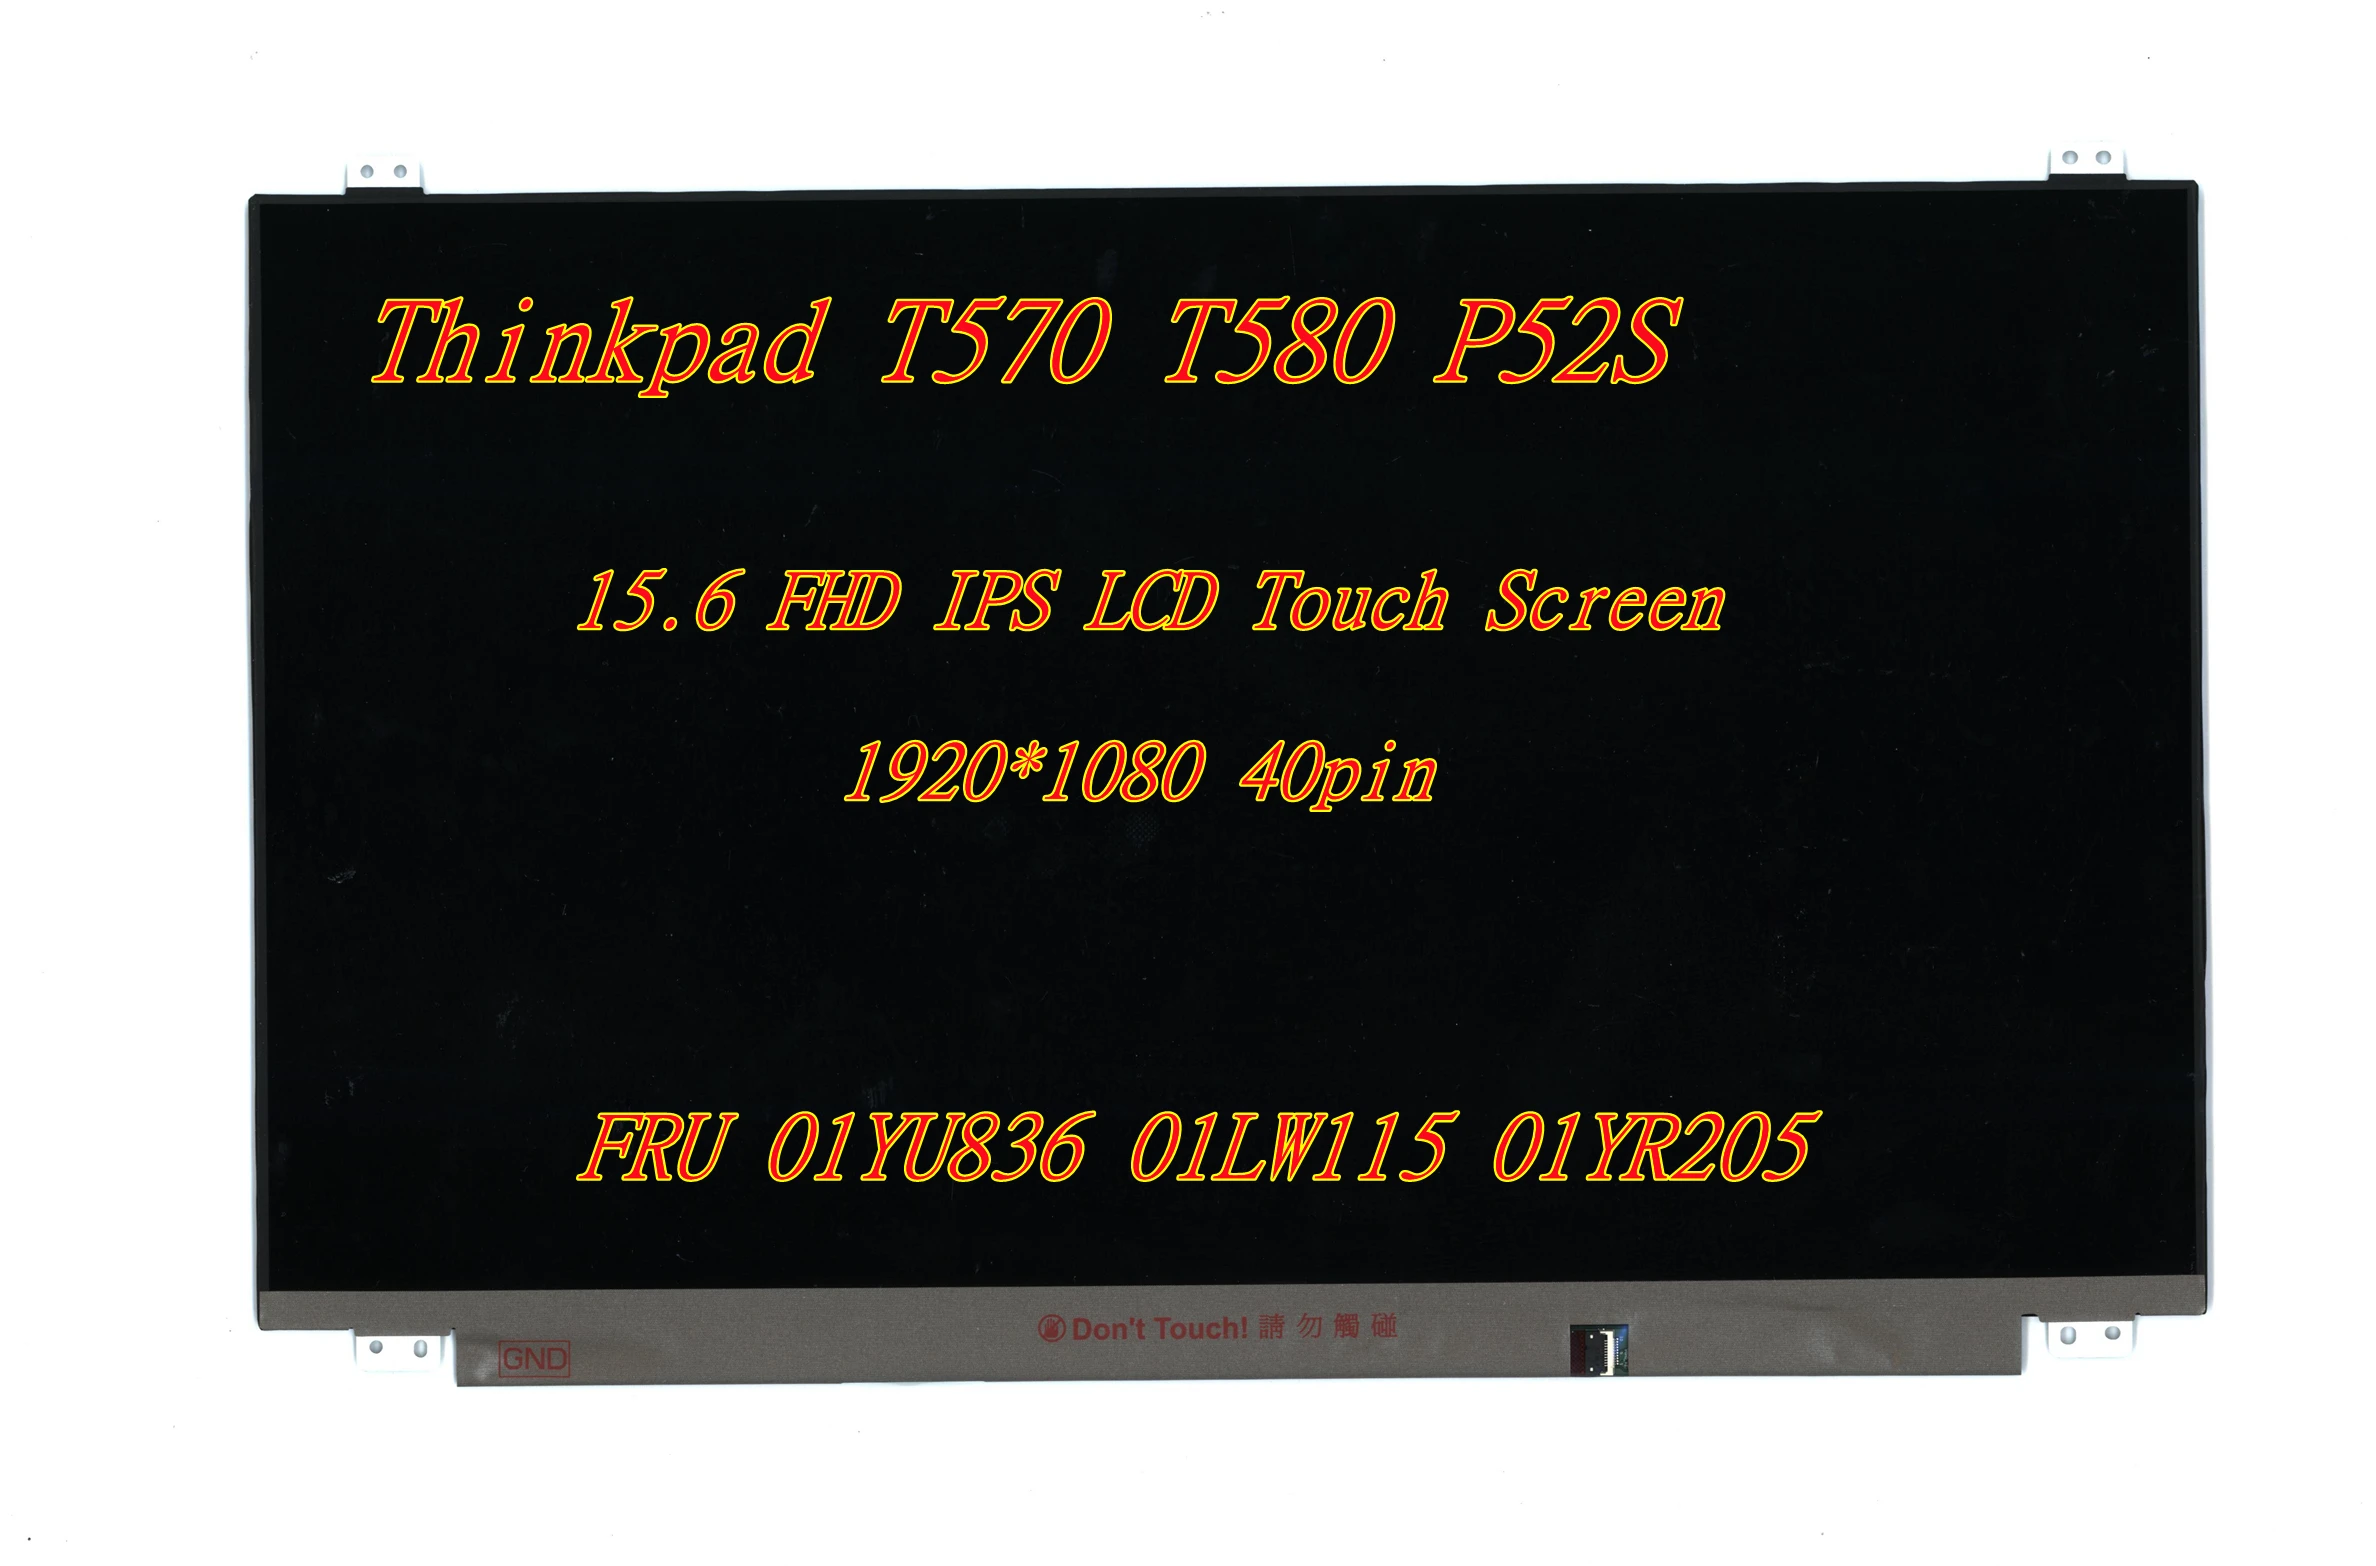 

New 15.6 FHD IPS LCD Screen For Lenovo Thinkpad T570 T580 P52S Laptop Touch Screen 40pin FRU 01YU836 01LW115 01YR205